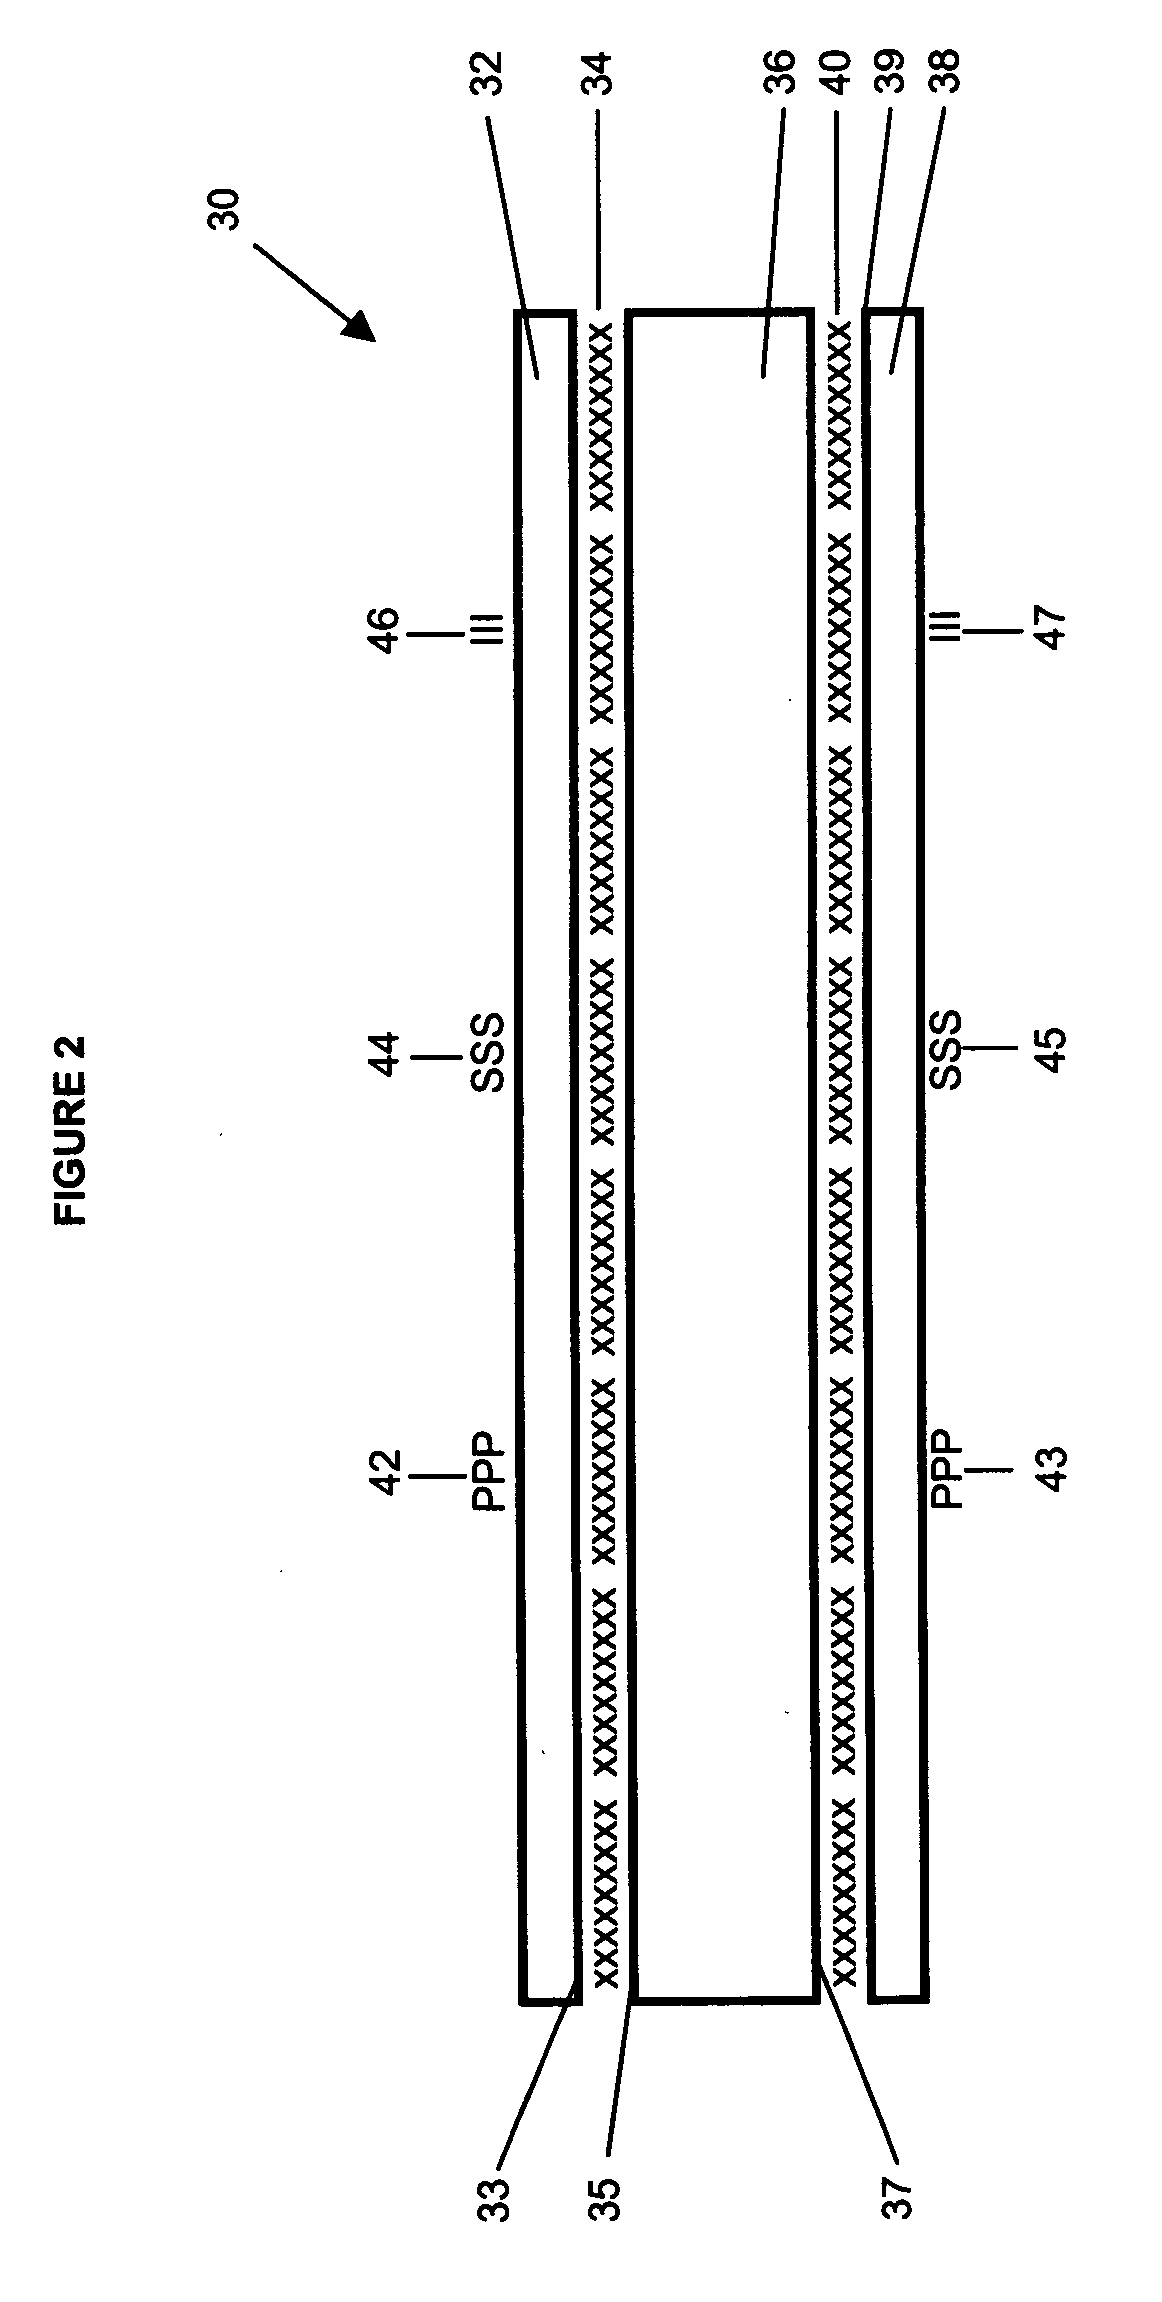 Method of producing printed business communication laminates from dissimilar substrates having different thicknesses and products produced therefrom